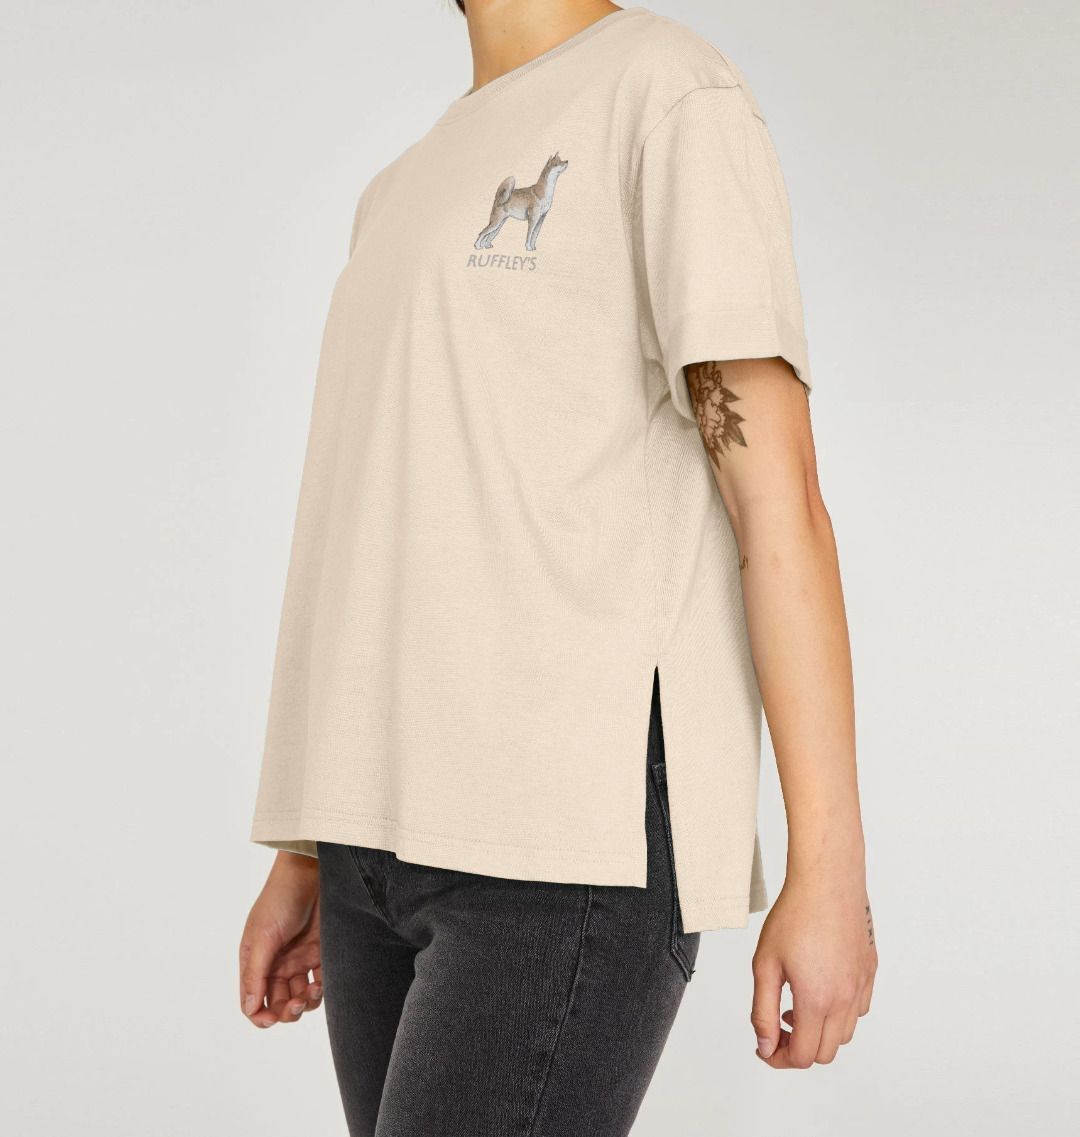 Shiba Inu - Relaxed Fit T-Shirt